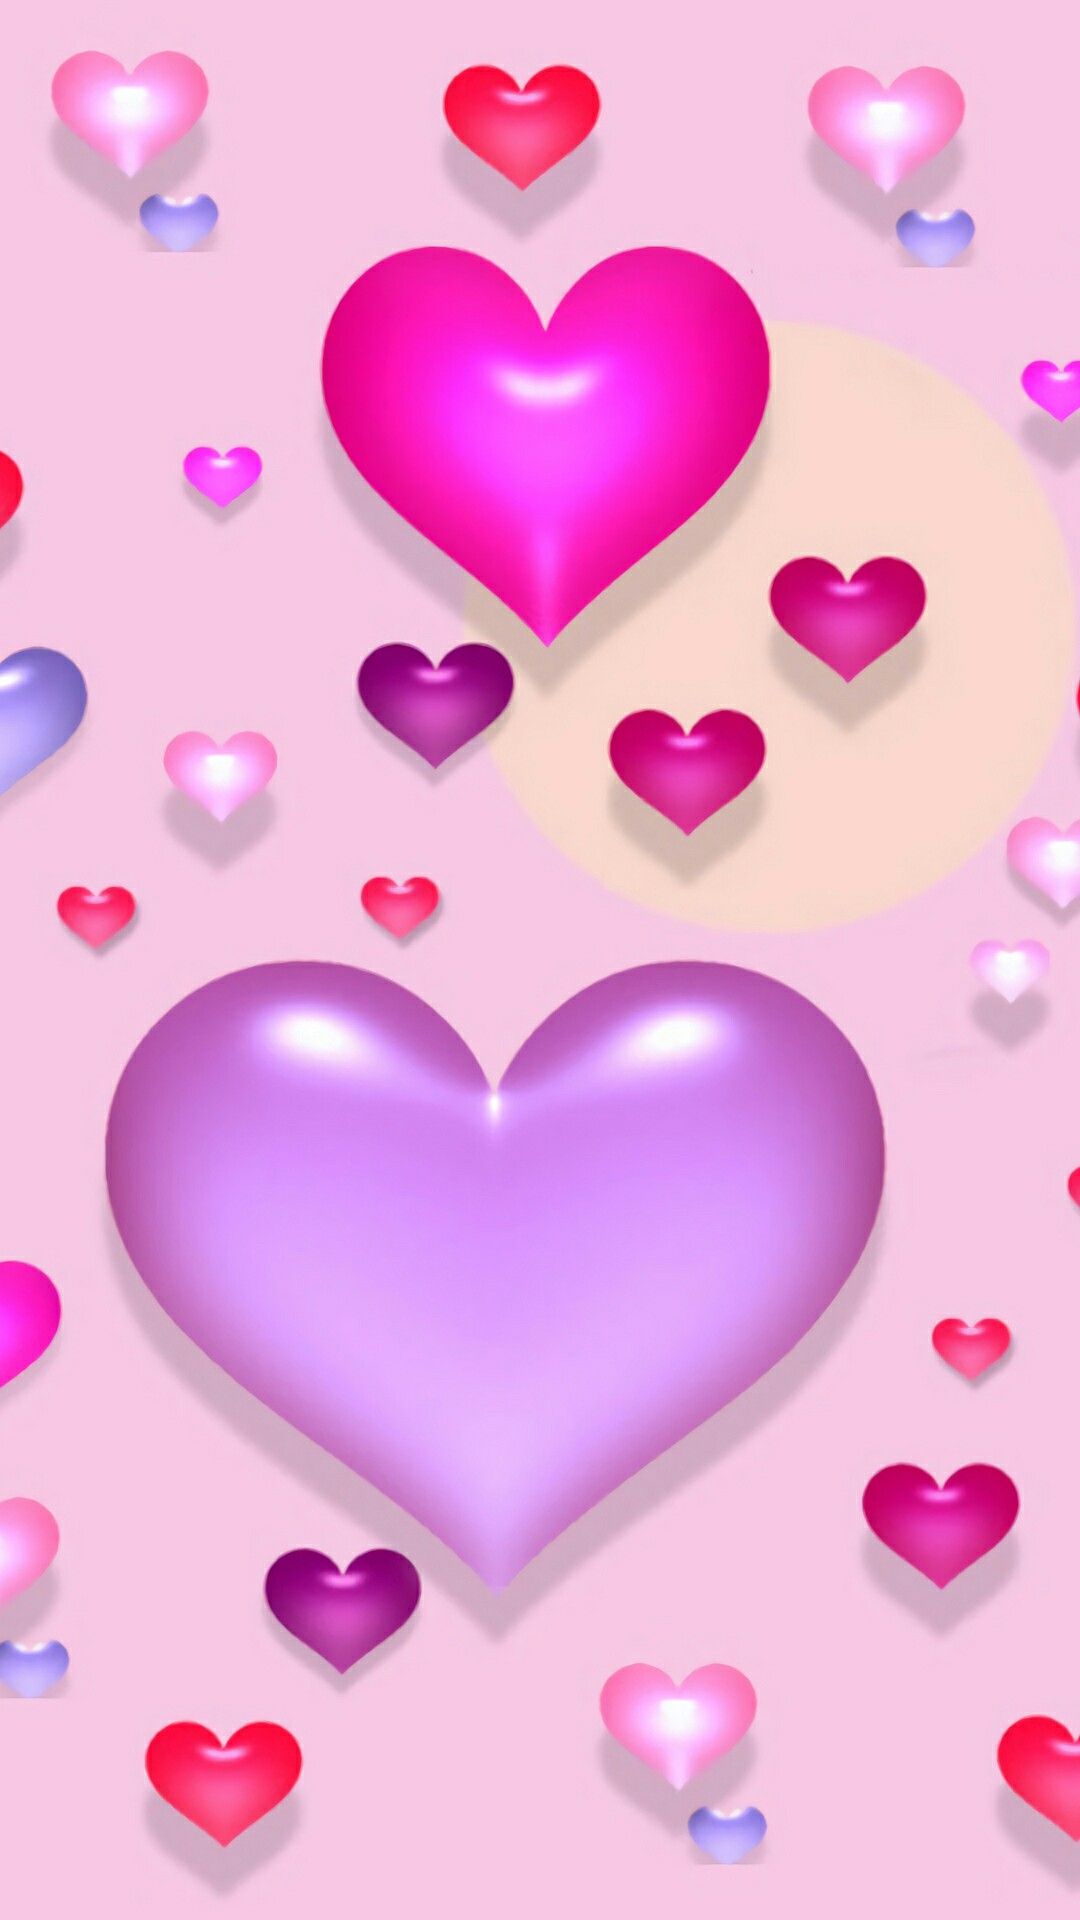 Pink and purple hearts. #cute #girlie #wallpaper. Valentines wallpaper, Heart wallpaper, Love wallpaper